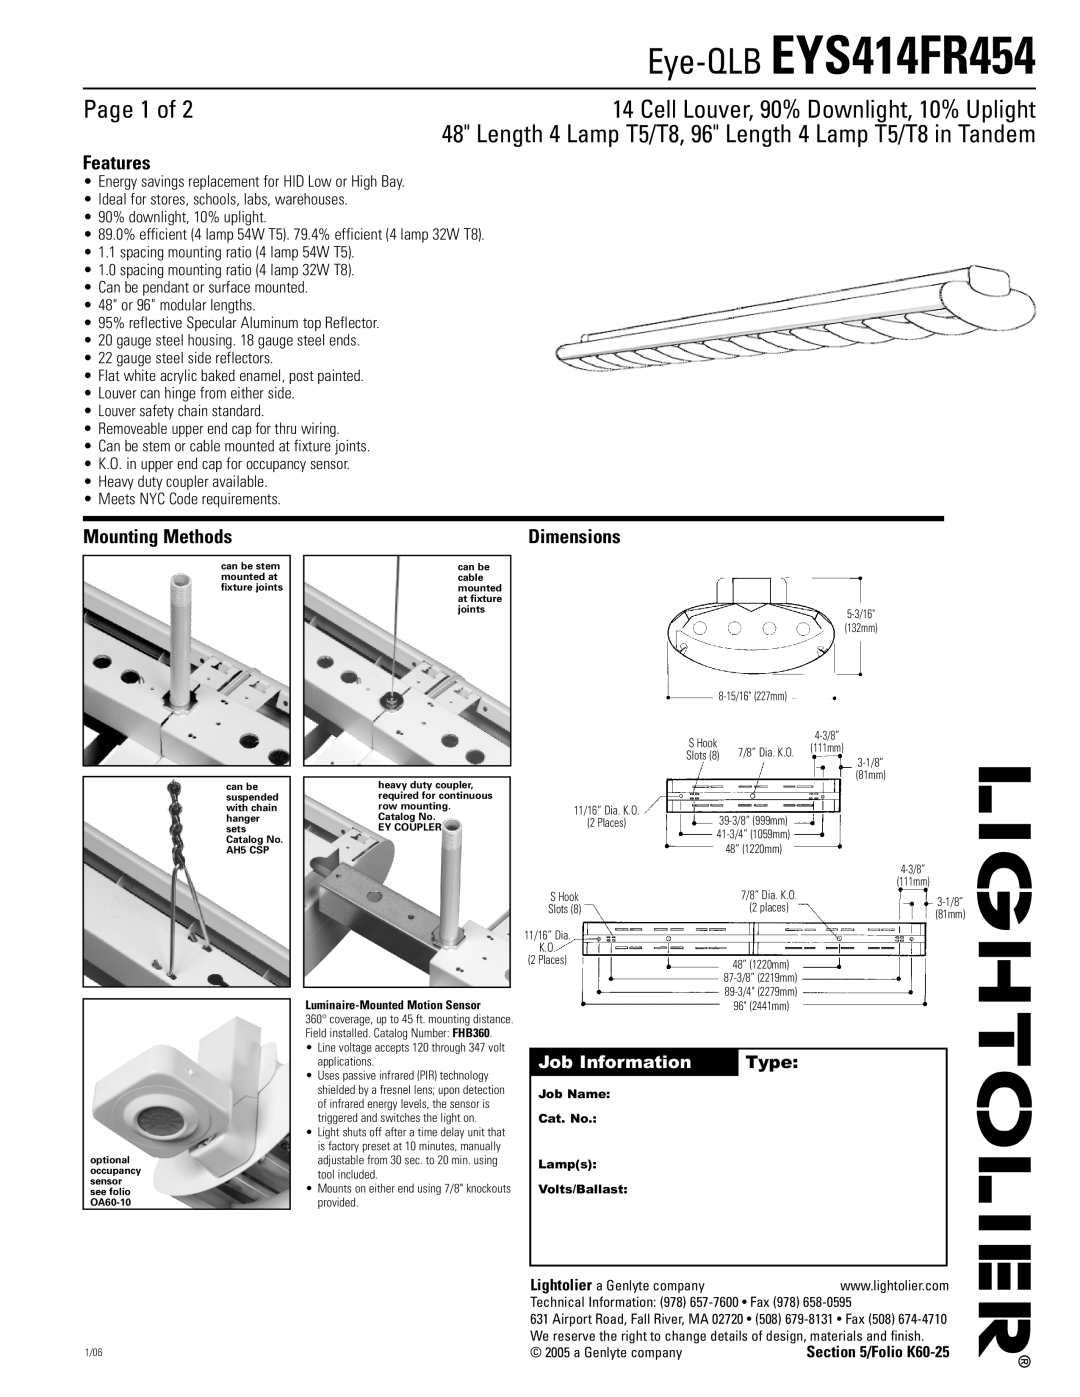 Lightolier dimensions Eye-QLB EYS414FR454, Page 1 of, Cell Louver, 90% Downlight, 10% Uplight, Features, Dimensions 